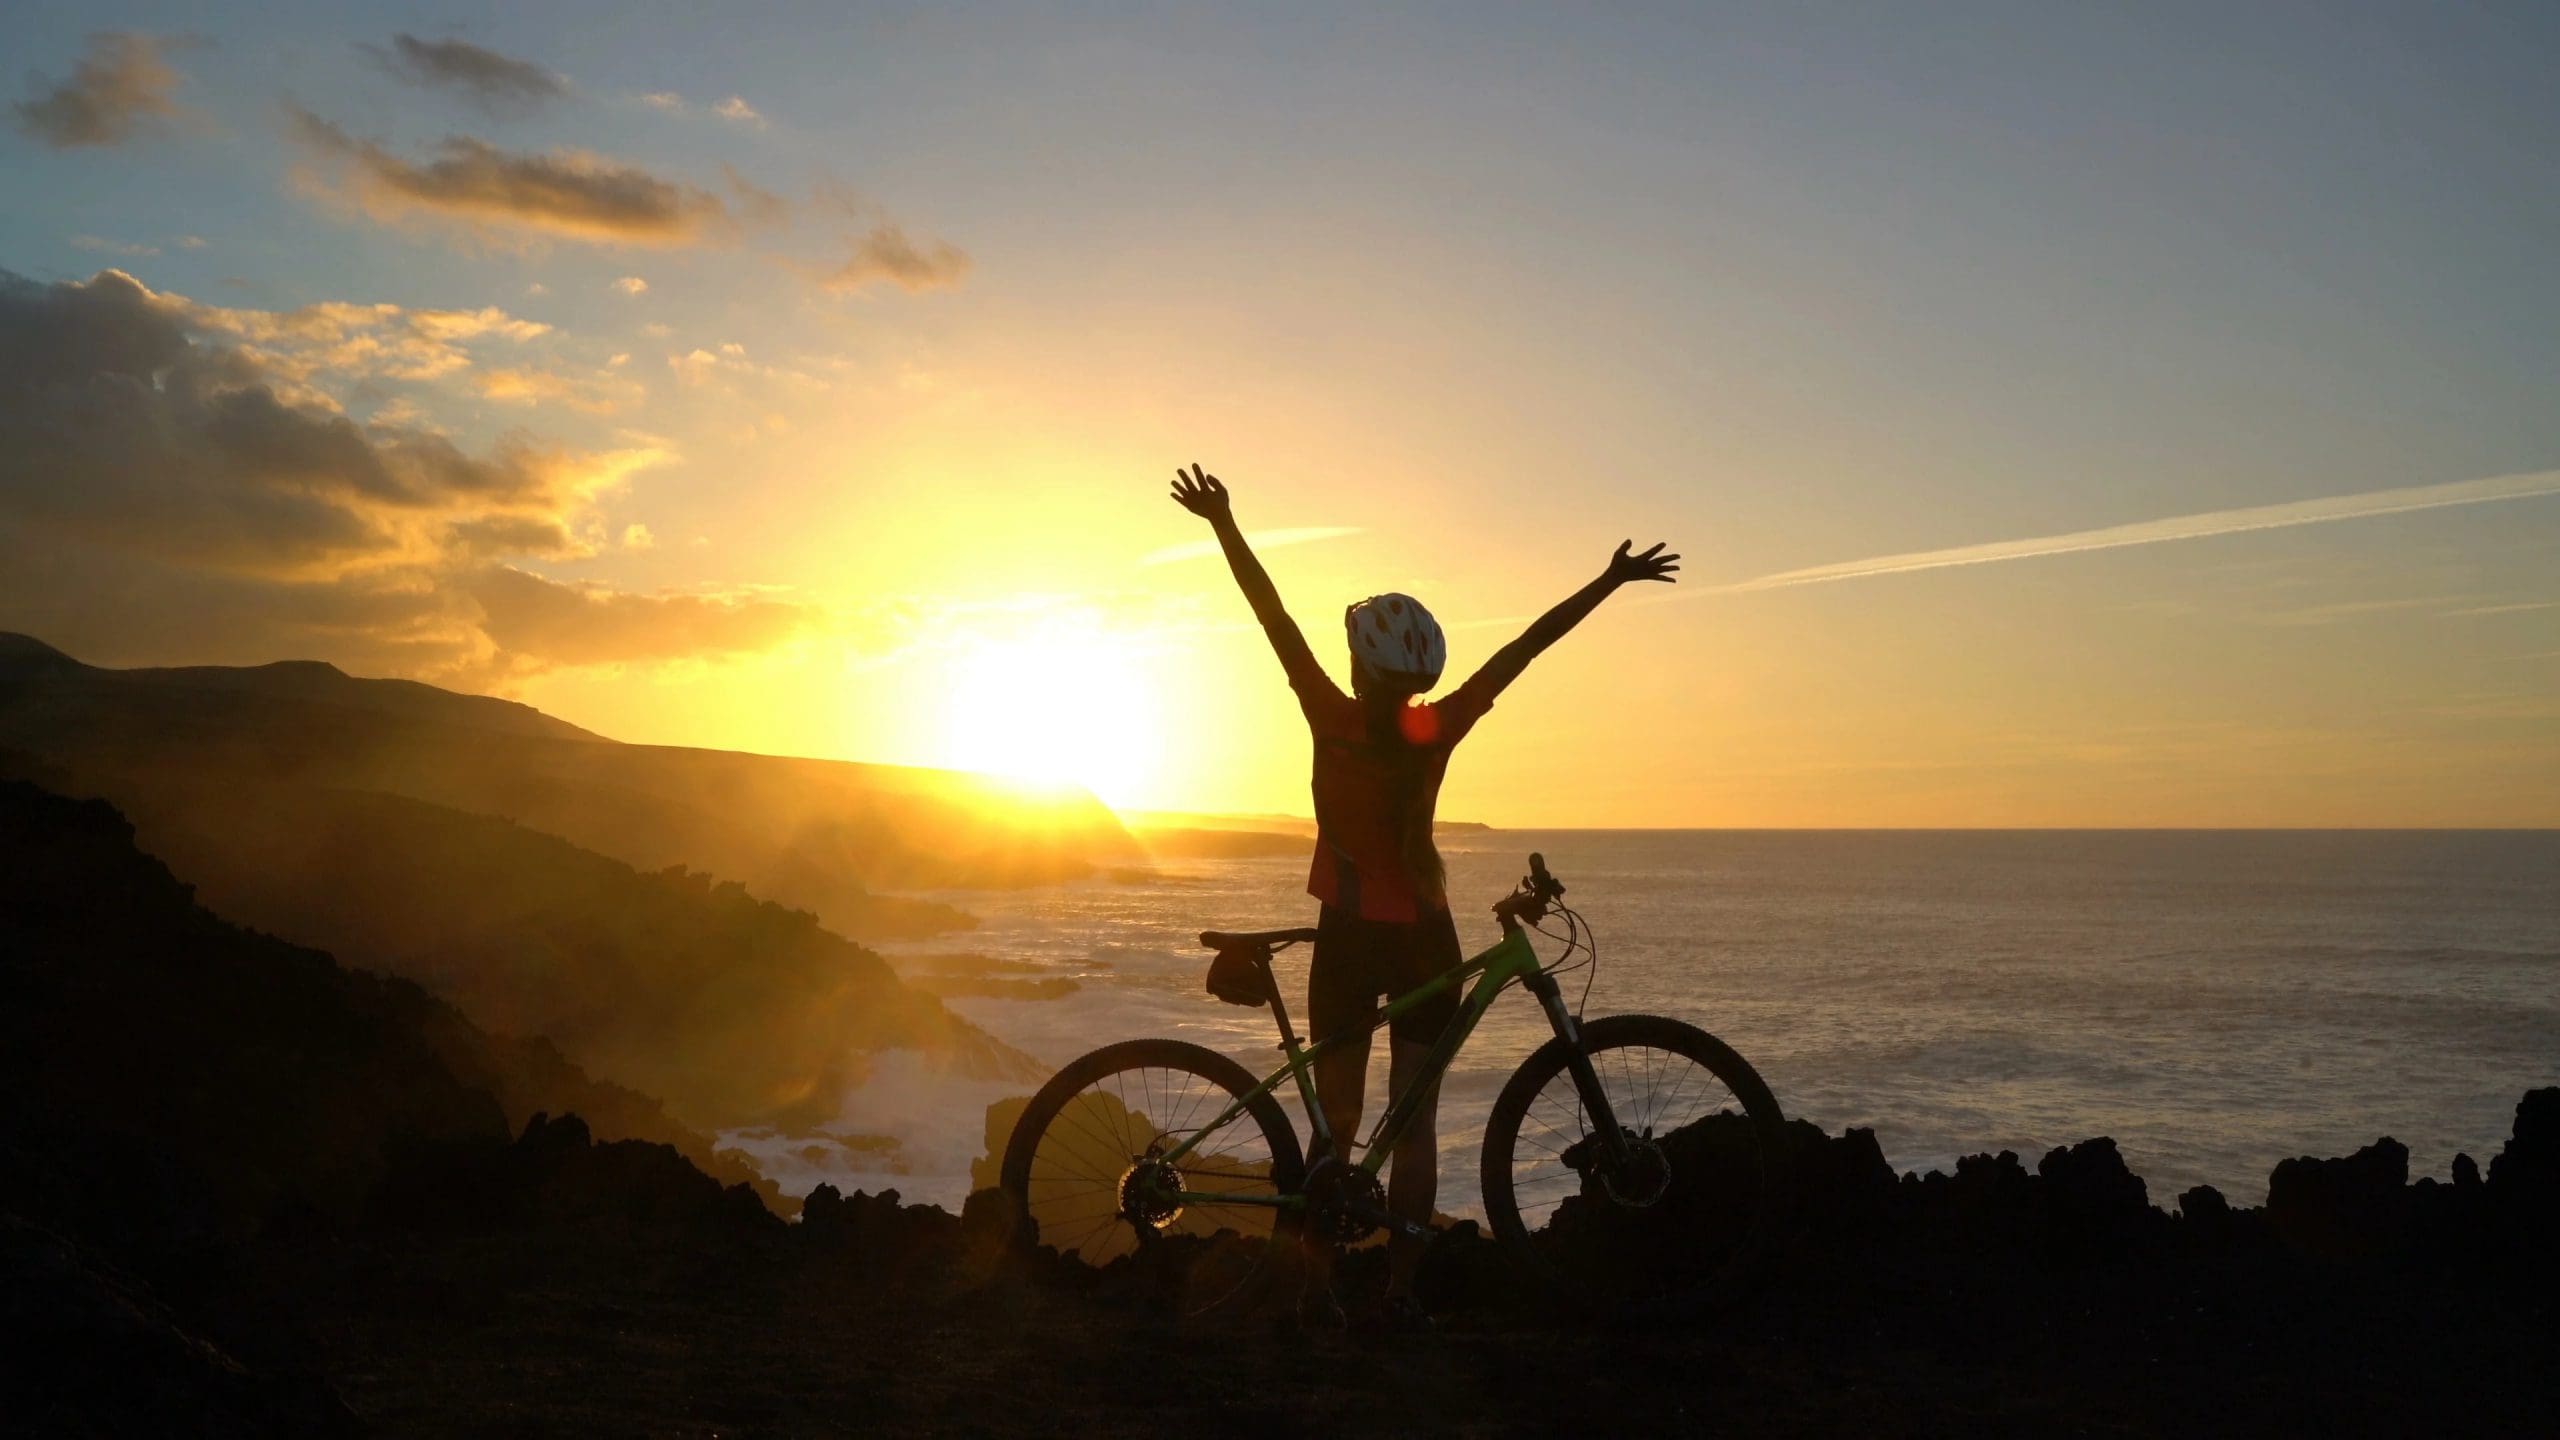 Female mountain biker on cliffs near shore with arms lifted in celebration during sunset